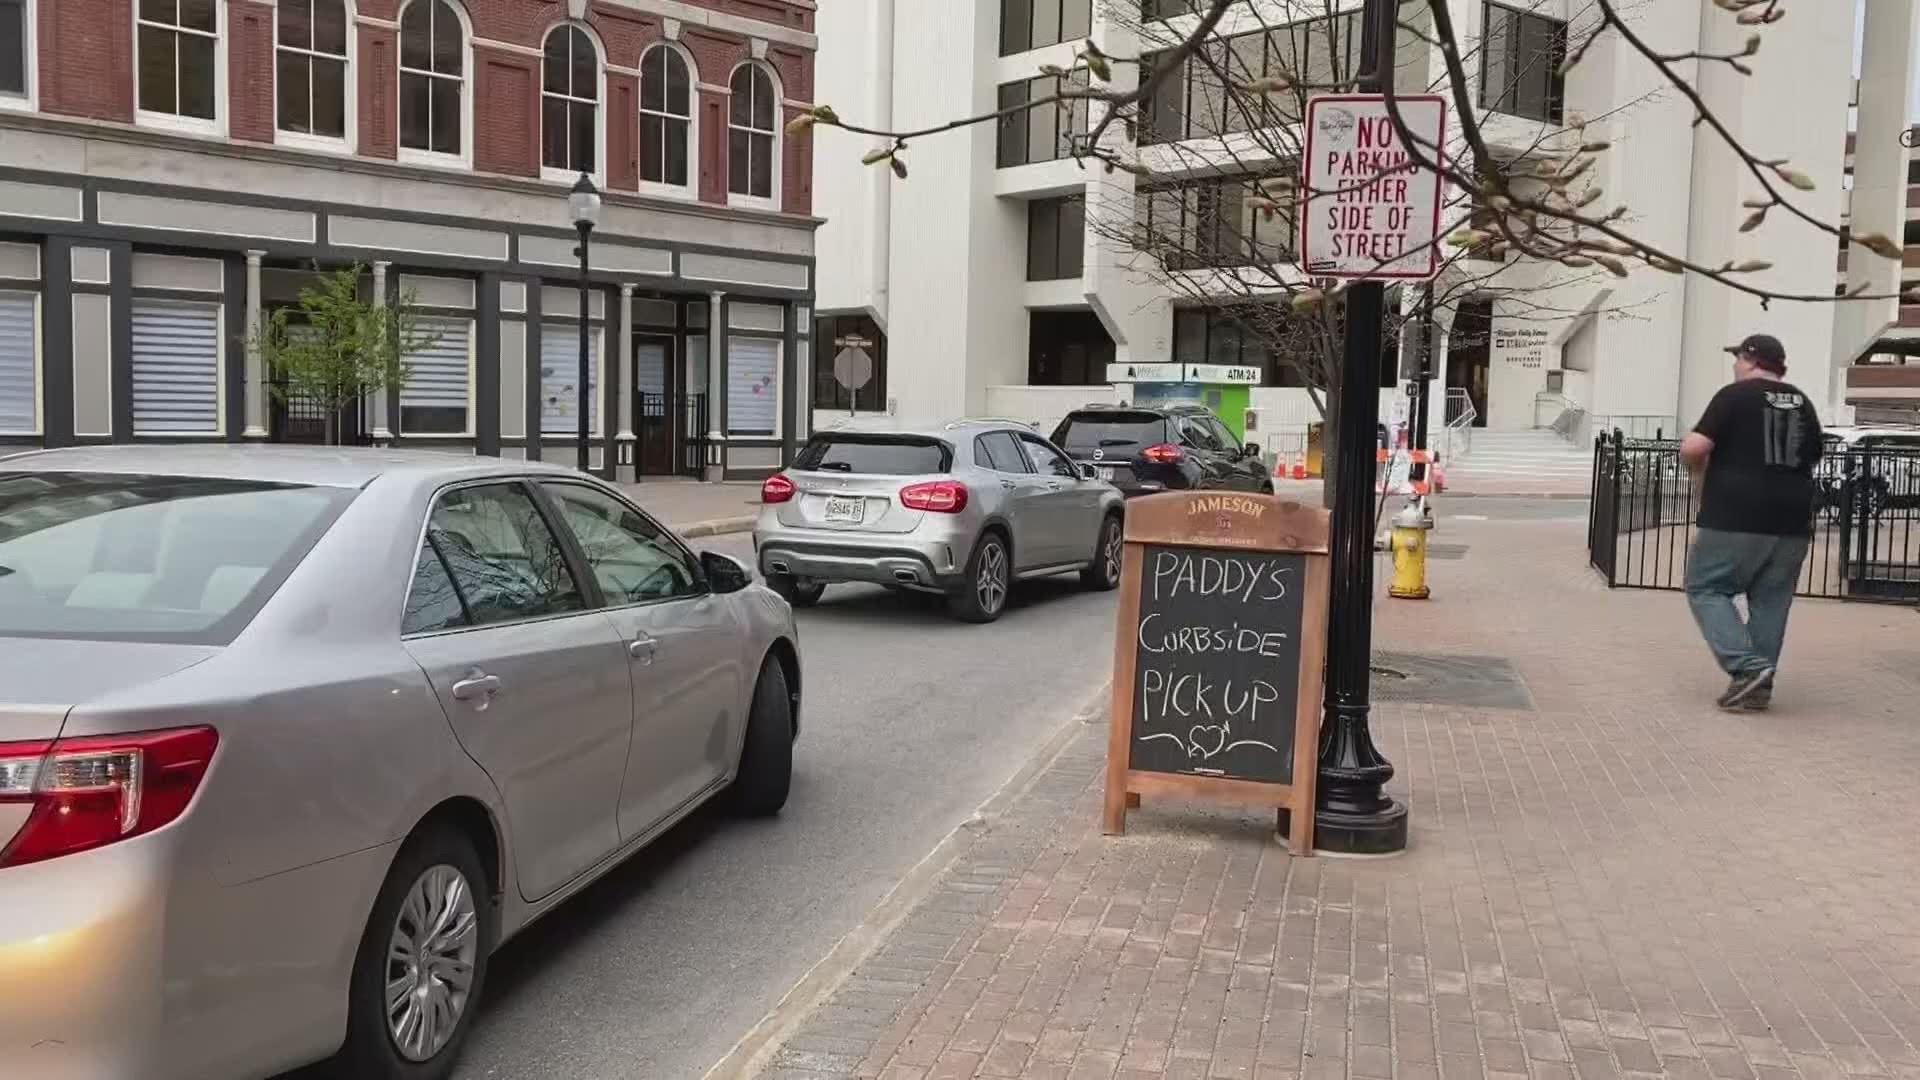 Parklets and outdoor seating could help businesses safely reopen amid COVID-19